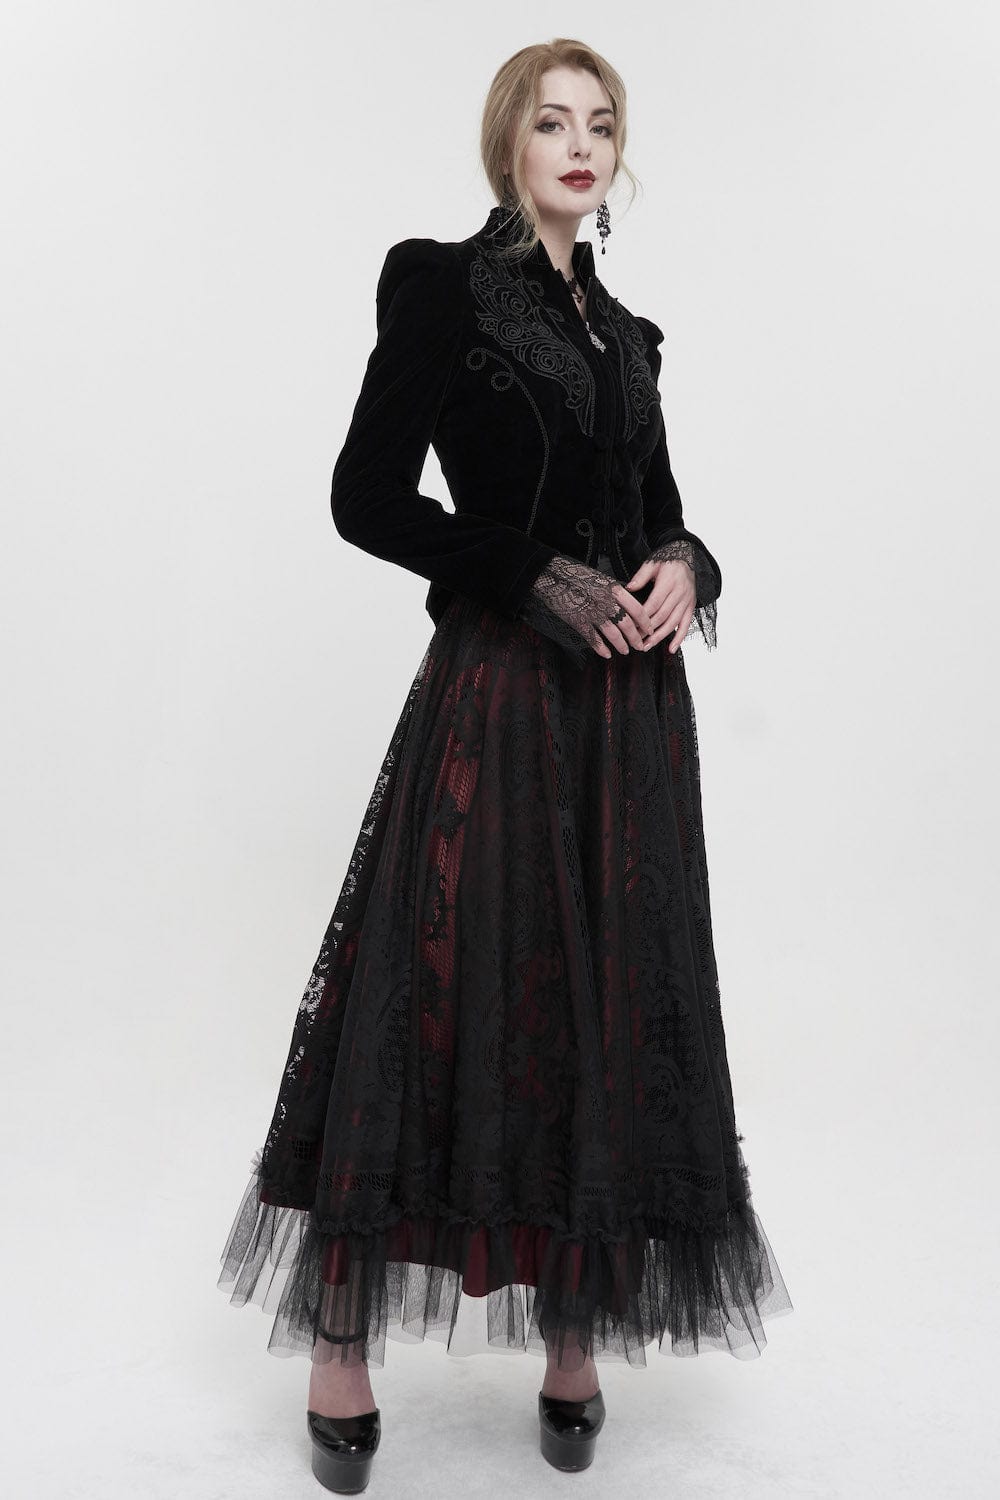 gothic actress wearing the Black velvet gothic victorian fitted women's jacket at Gallery Serpentine